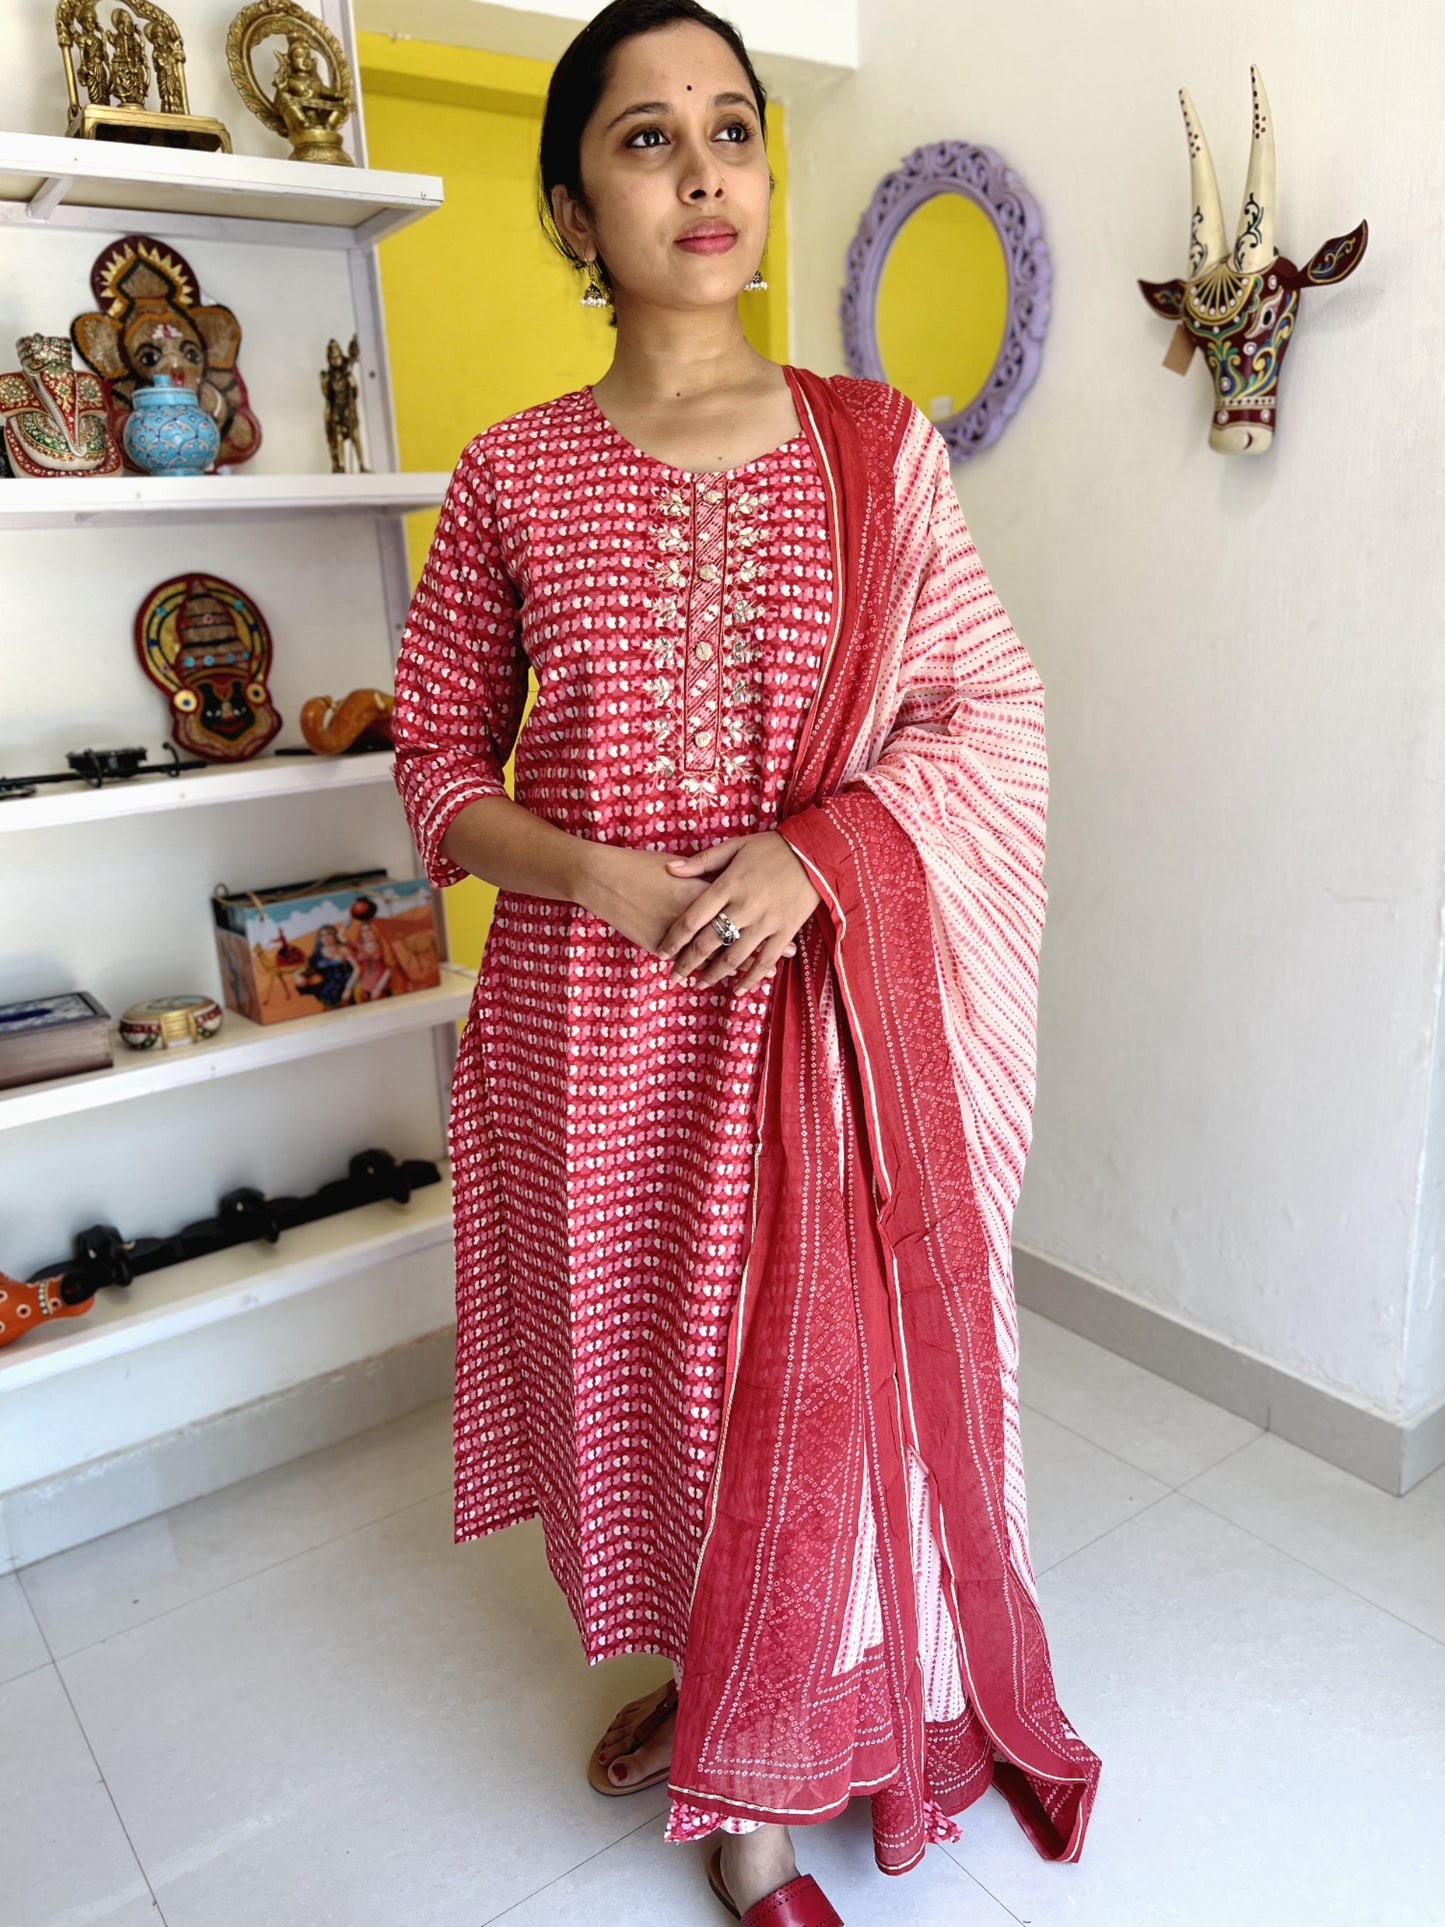 Southloom Stitched Cotton Salwar Set in Red and Pink with Floral Prints on Body